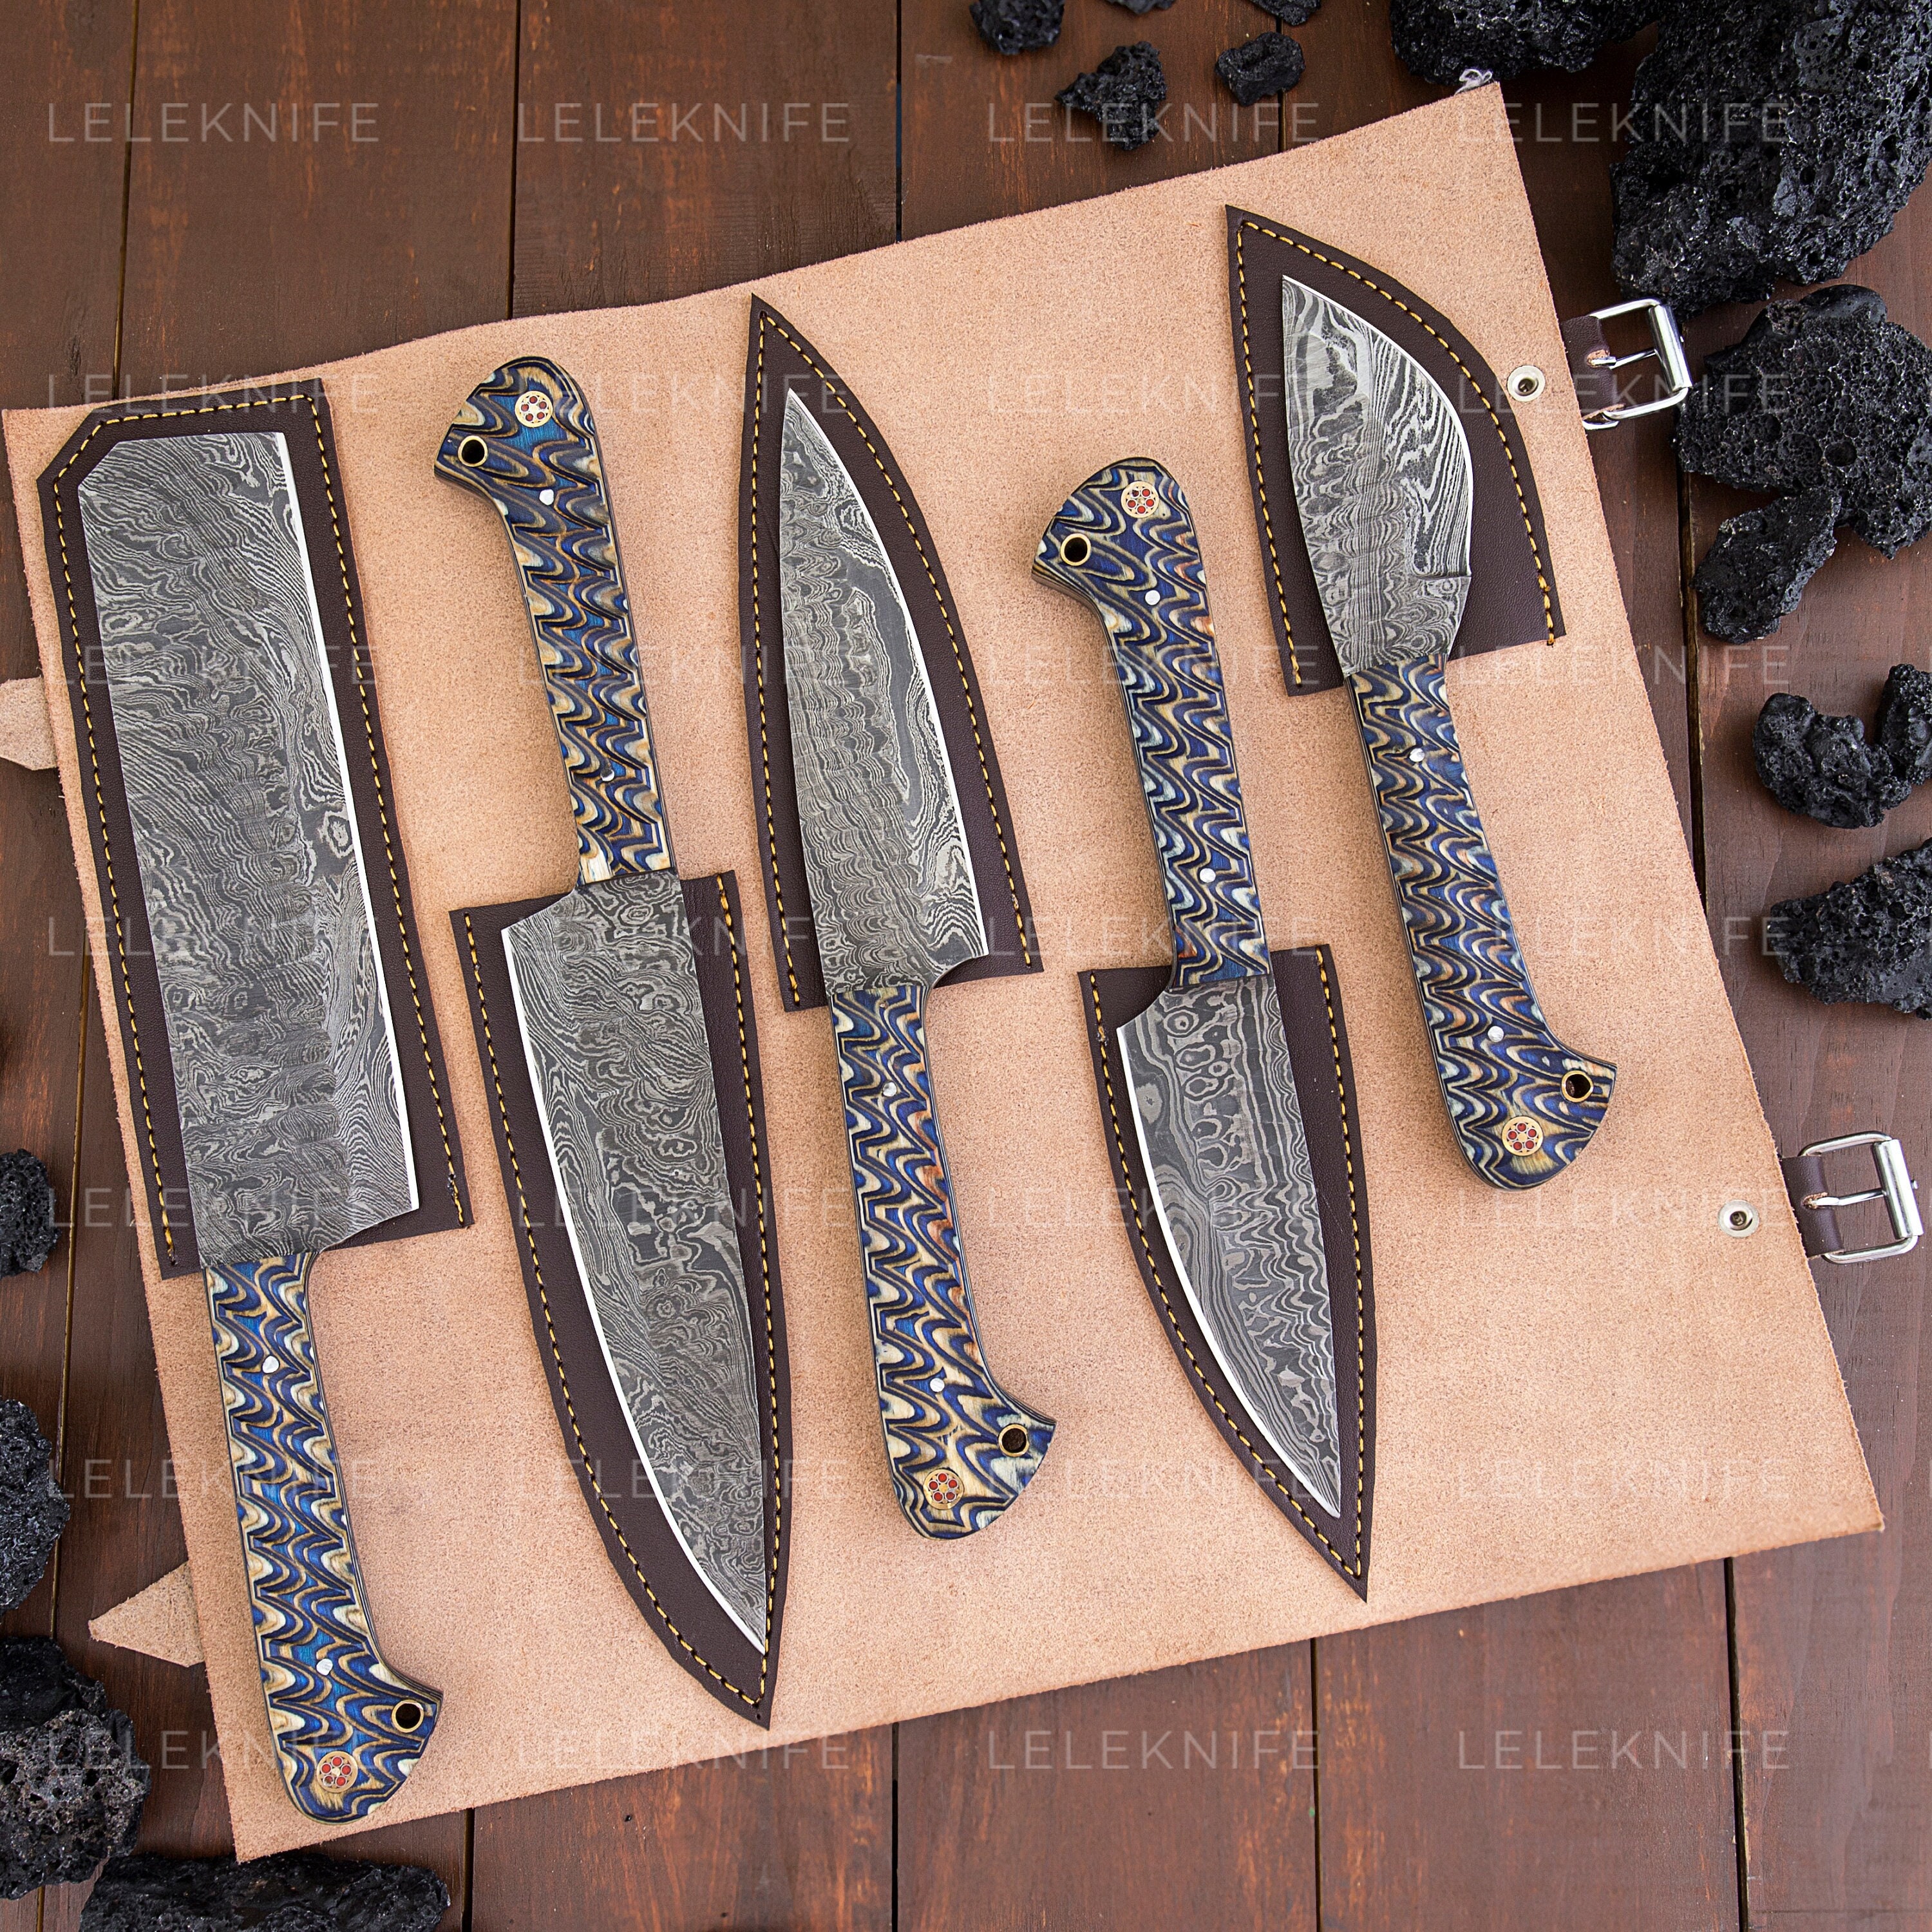 Handmade Damascus Steel Kitchen Knife/steak Knife/ Cleaver/ Vegetable and  Meat Cutting-set of 3-KD2 